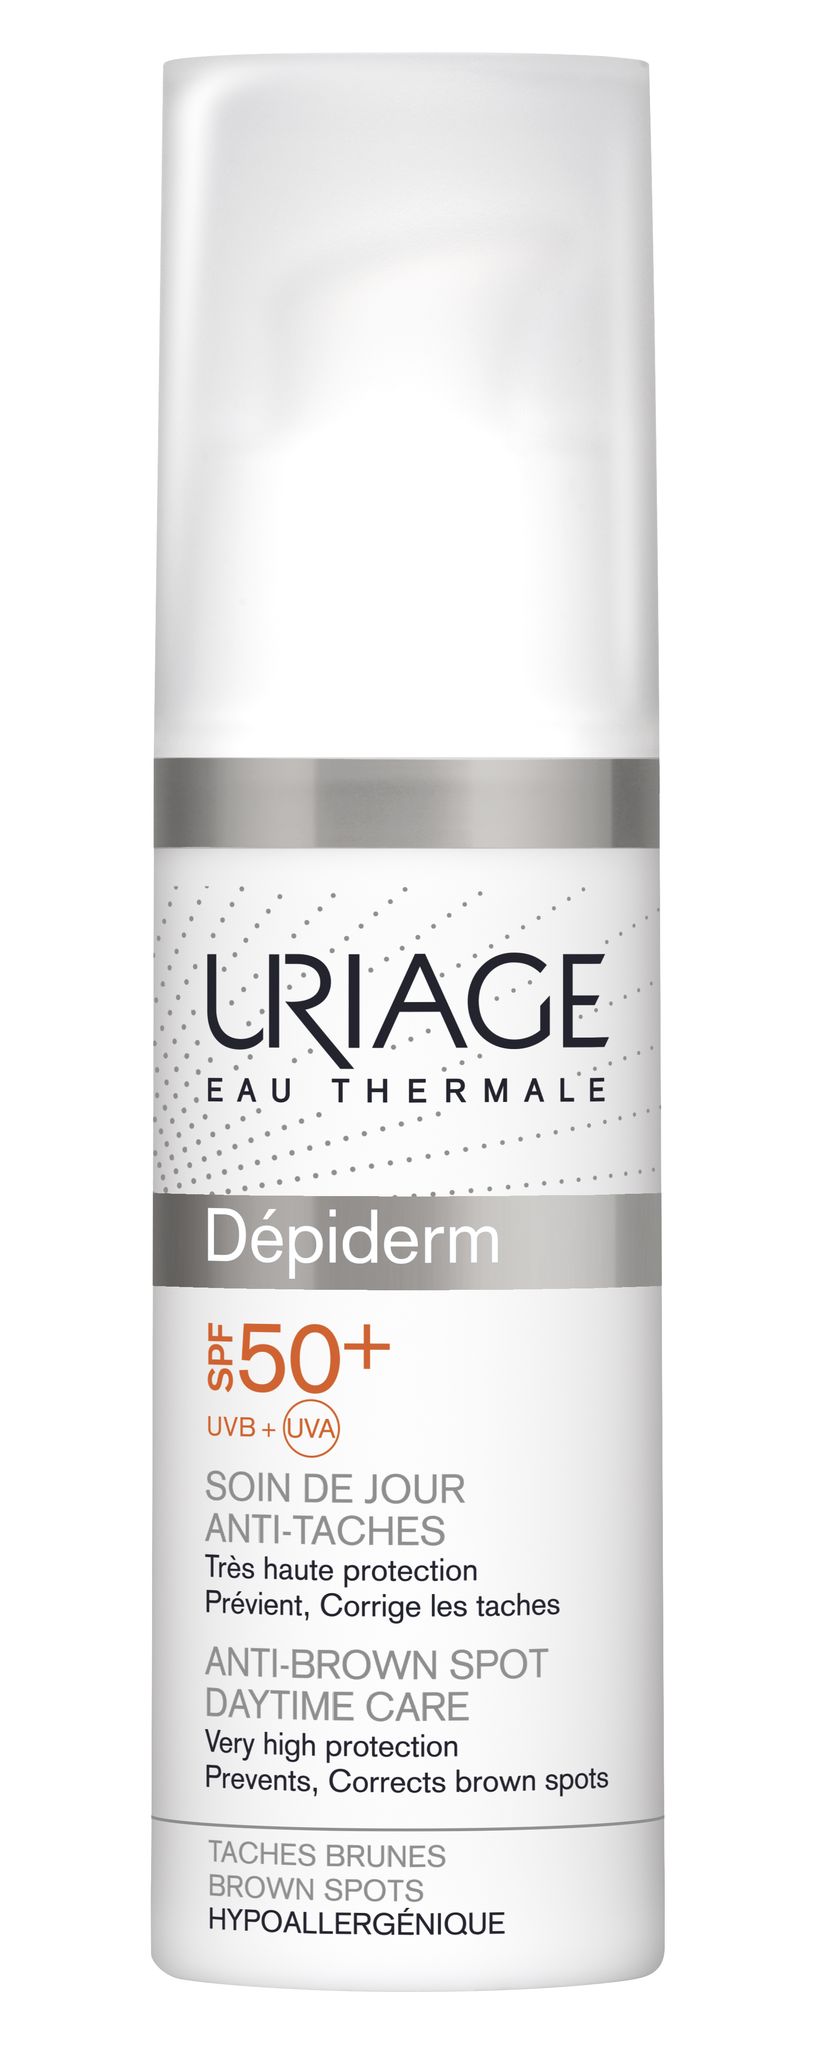 DEPIDERM SPF 50 Anti-brown spots high protection Cream